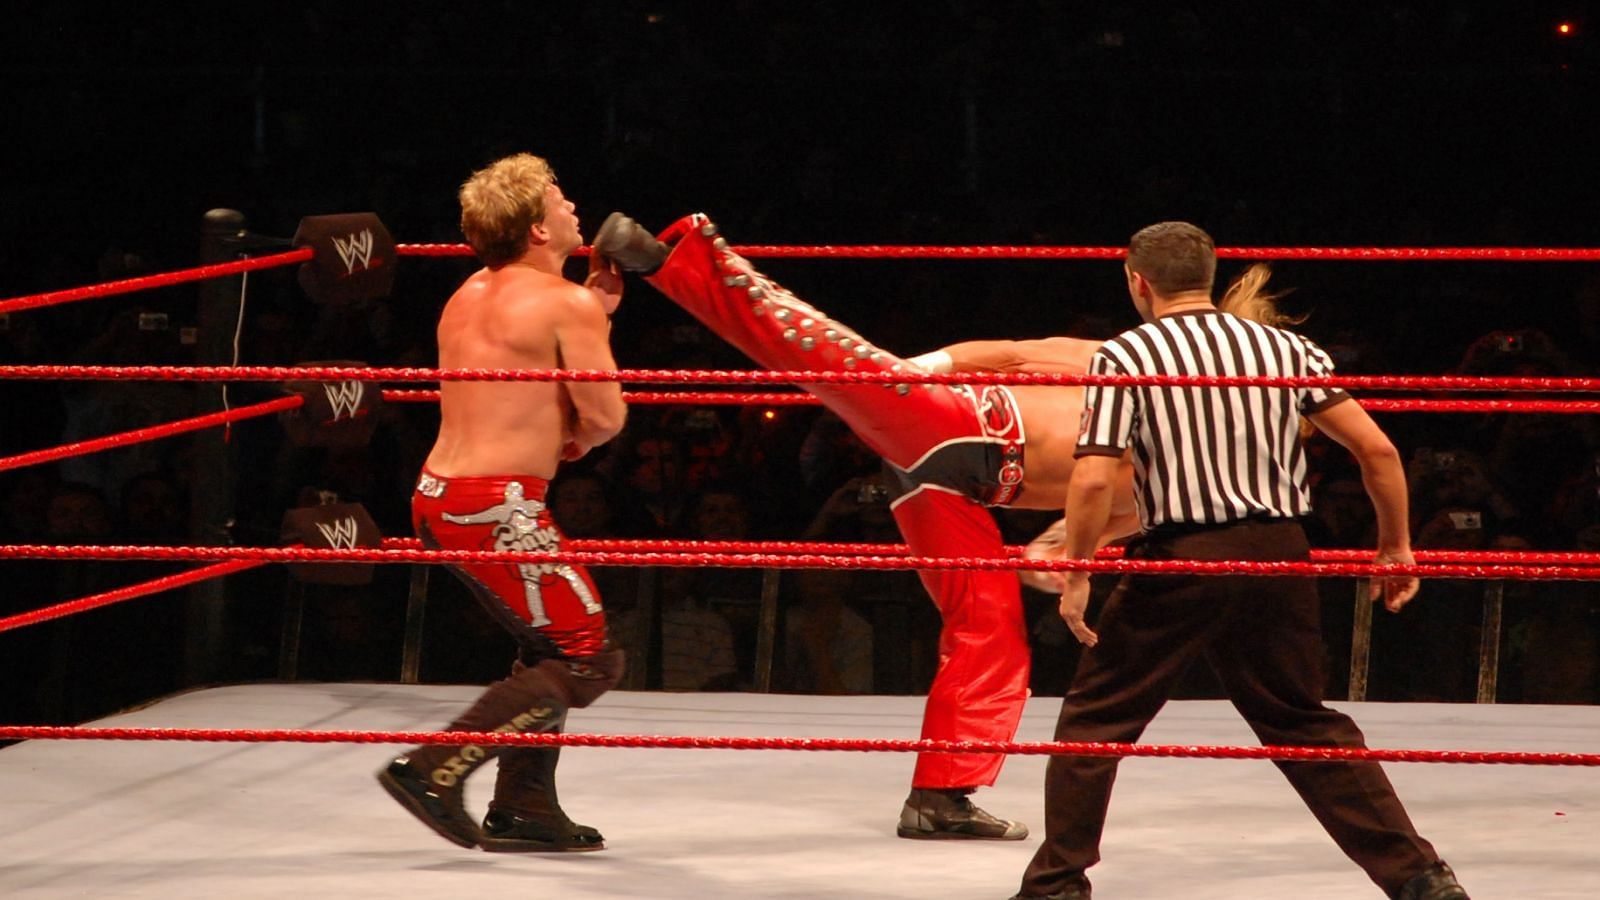 Sweet Chin Music in motion for Chris Jericho